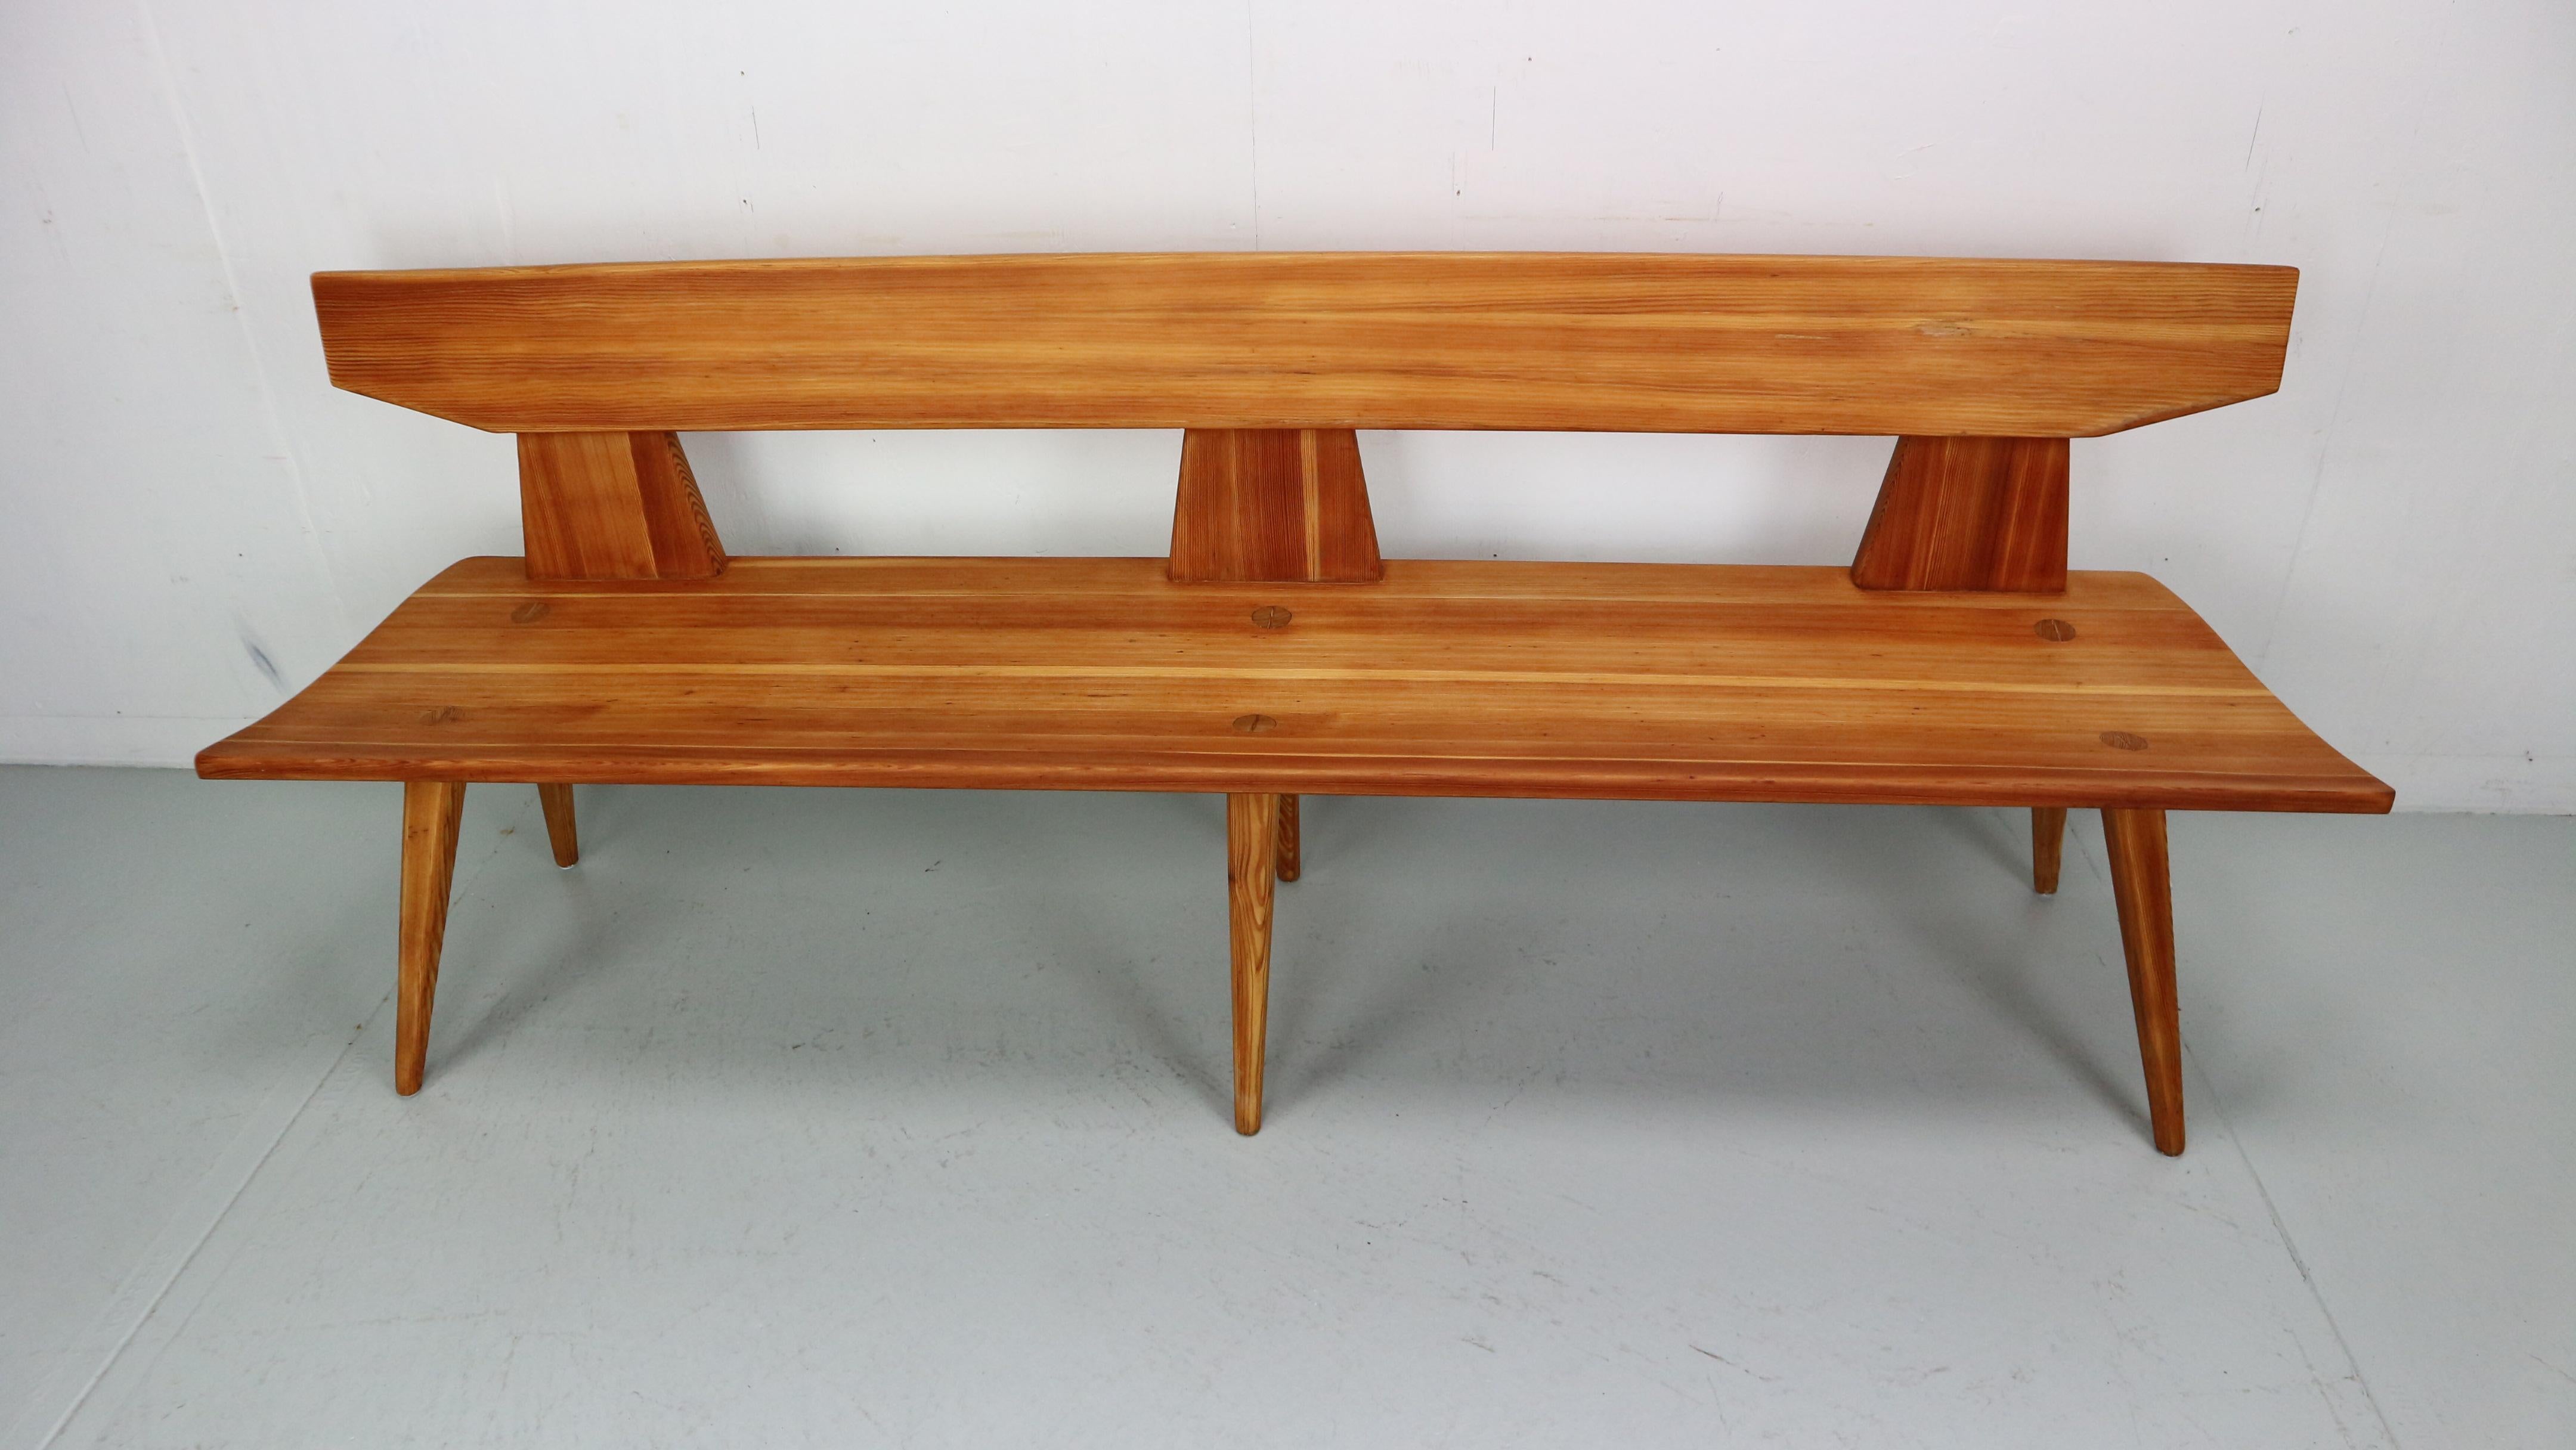 Danish Jacob Kielland Brandt Bench in Pine Wood for Christiansen, Handcrafted, 1960s For Sale